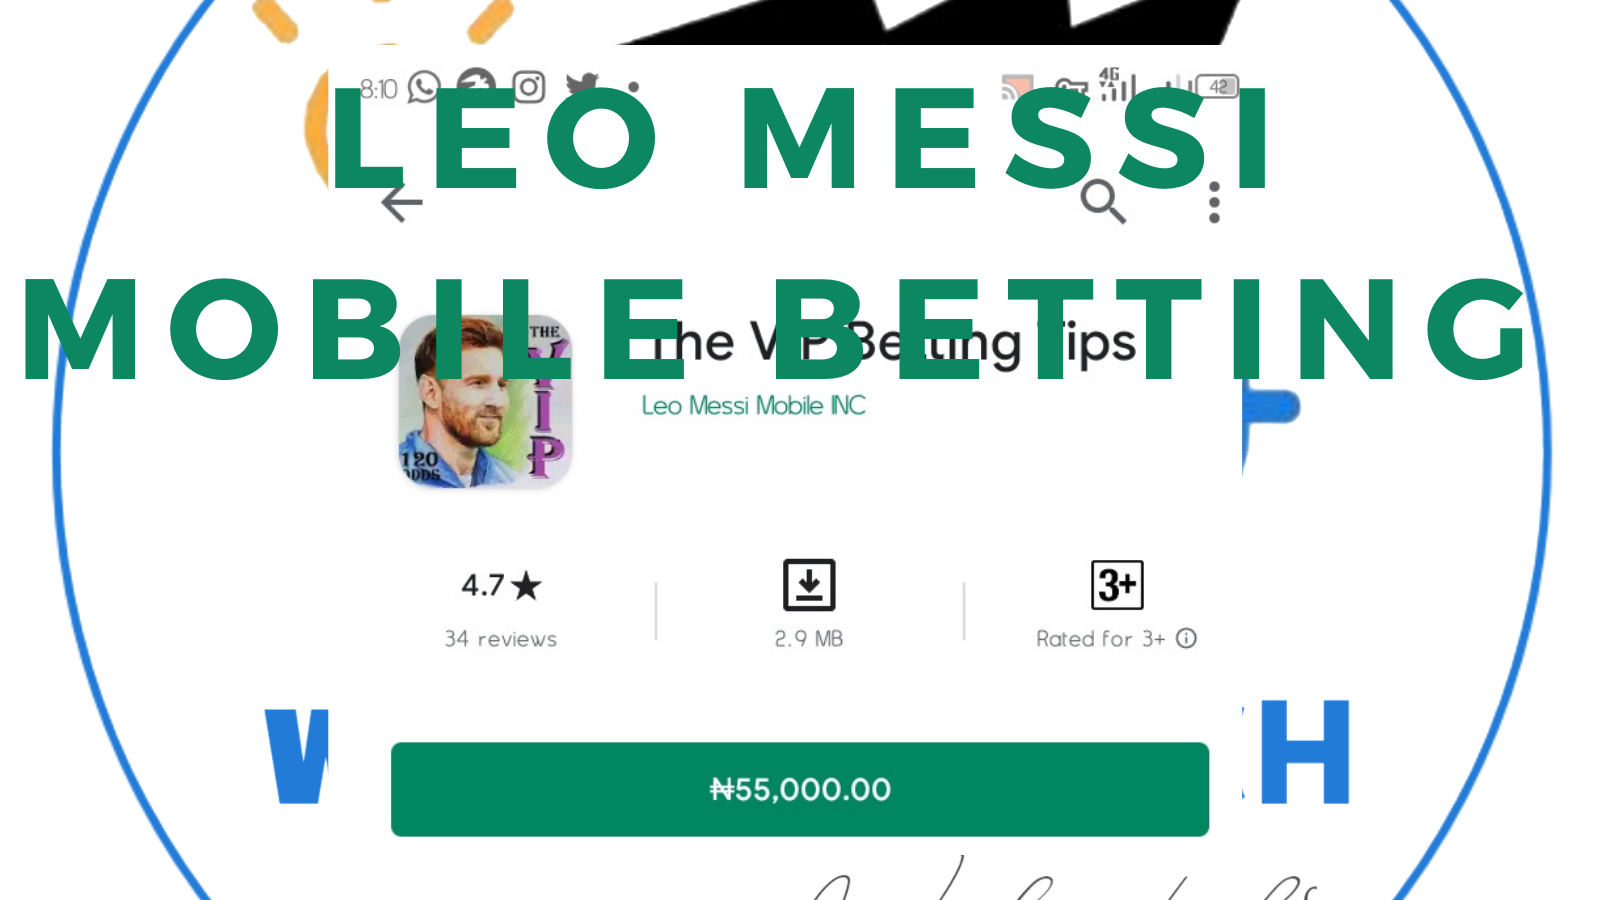 The Leo Messi Mobile  - The Vip Betting Tips 2021